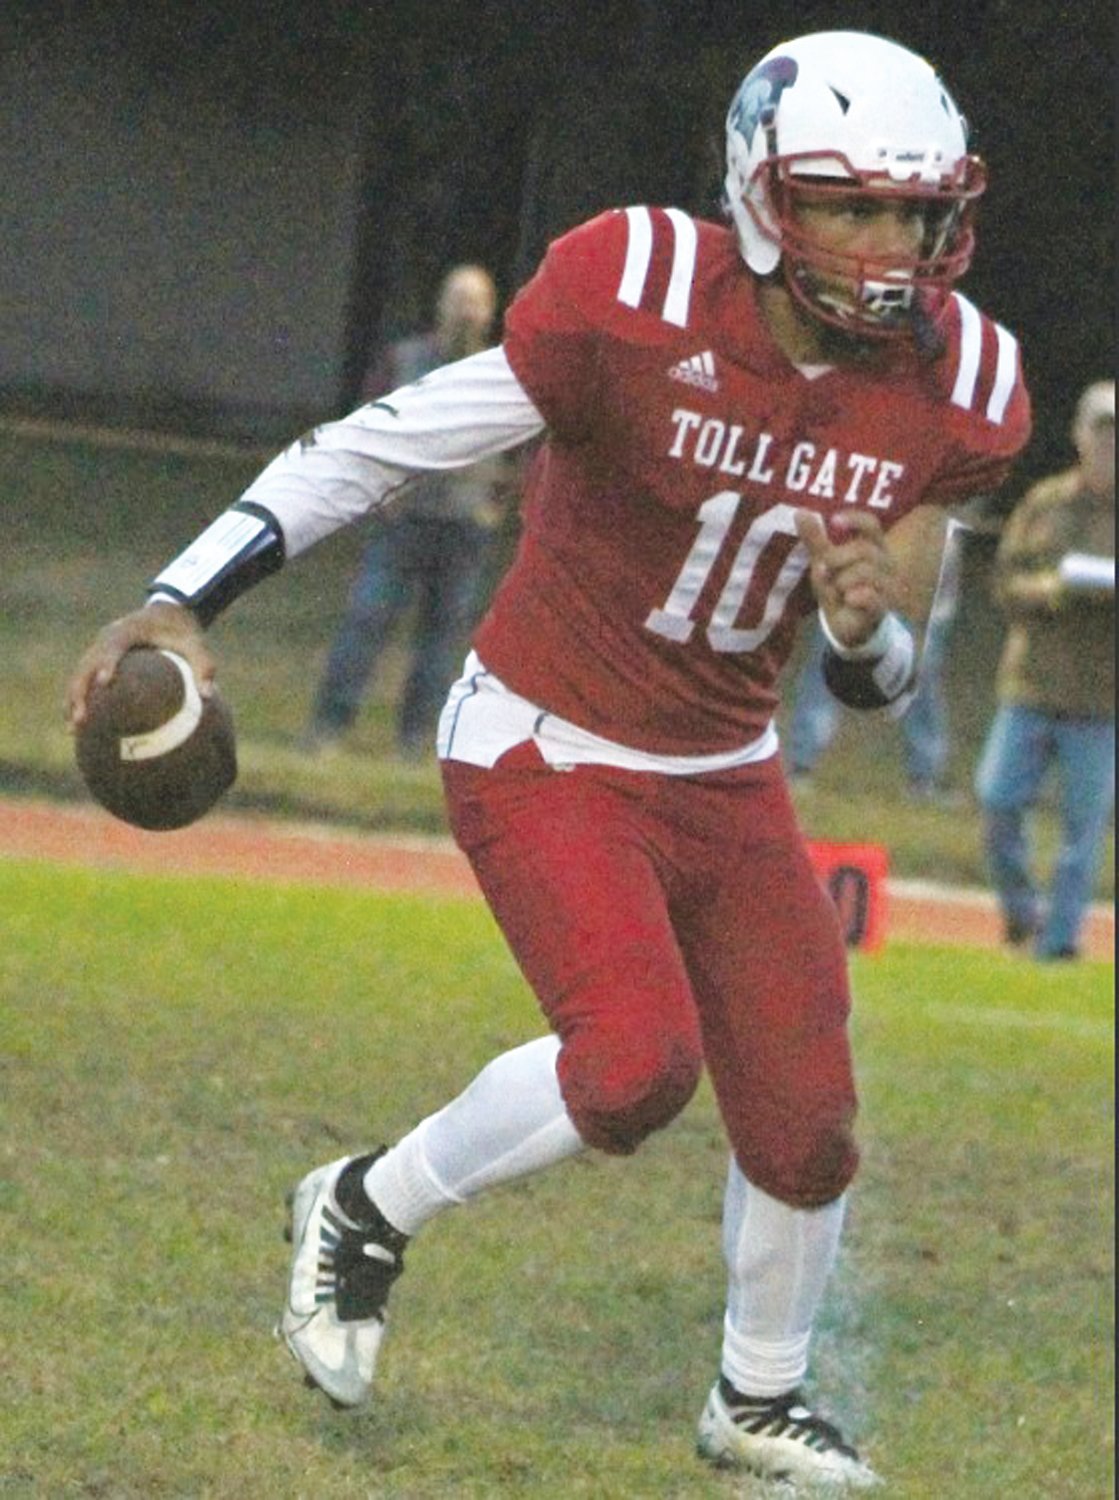 ON THE RUN: Toll Gate quarterback Jay Vann looks to pick up some yards.